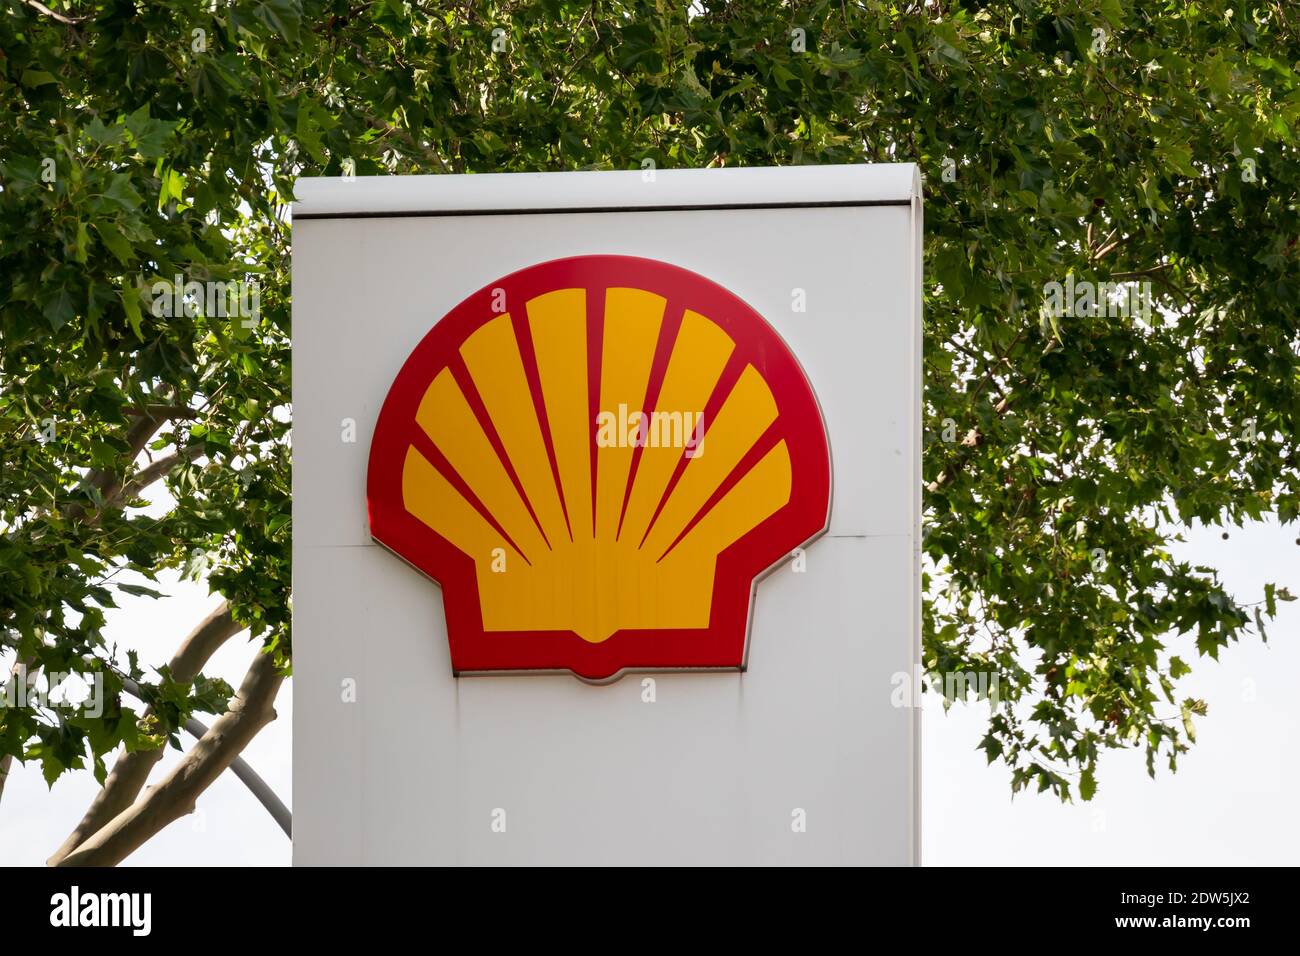 BERLIN, GERMANY - JUNE 9, 2020: Shell Logo In Front of A Tree In Summer Stock Photo